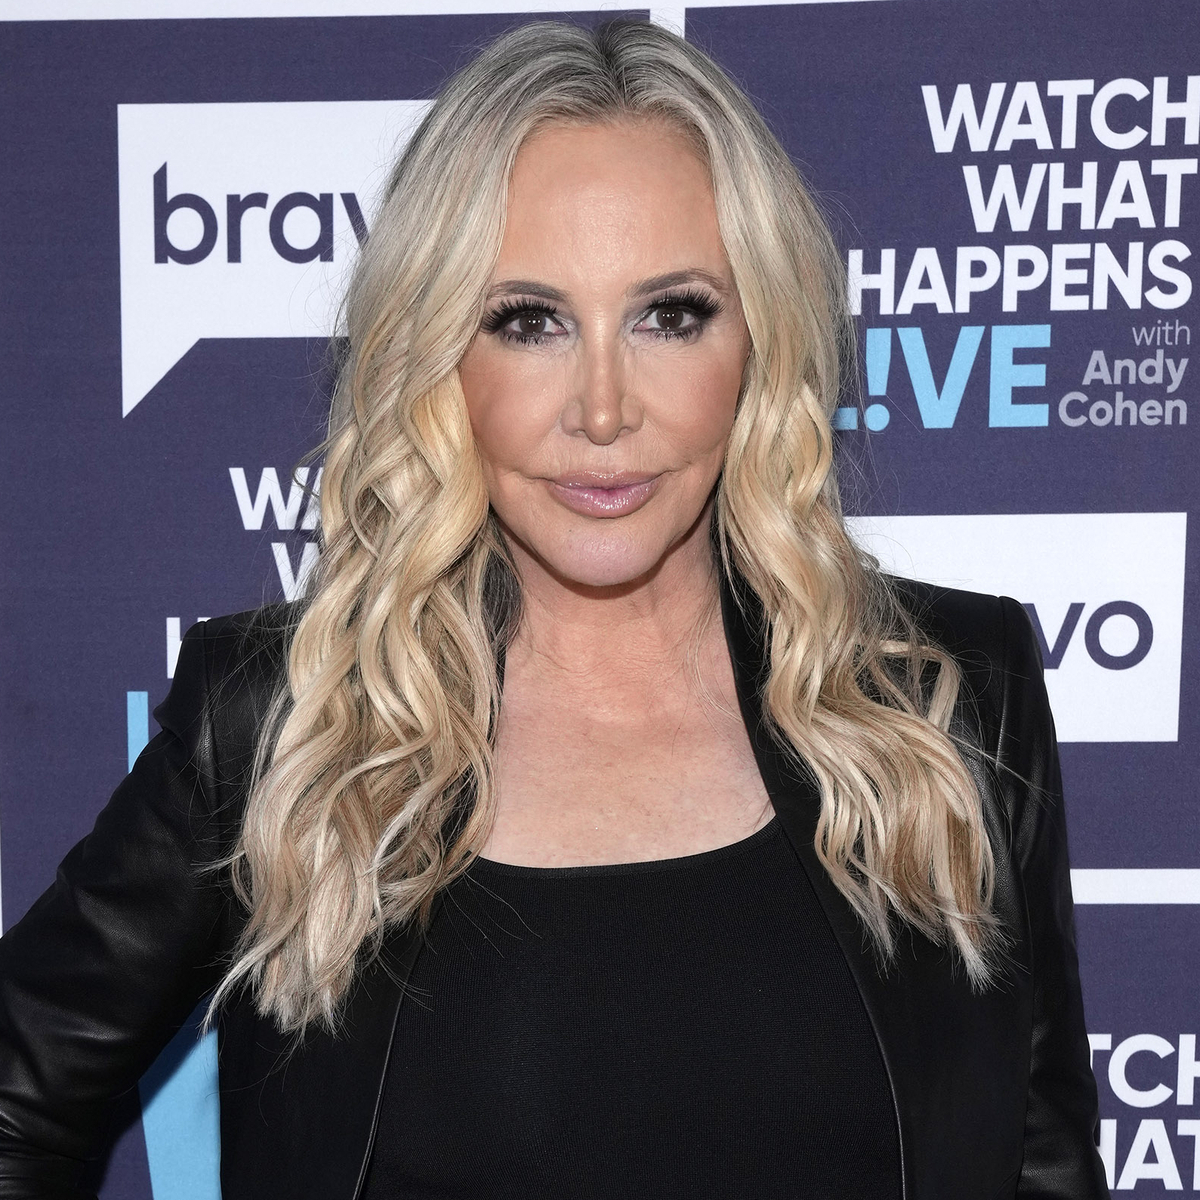 RHOC’s Shannon Beador Officially Charged With DUI & Hit-and-Run